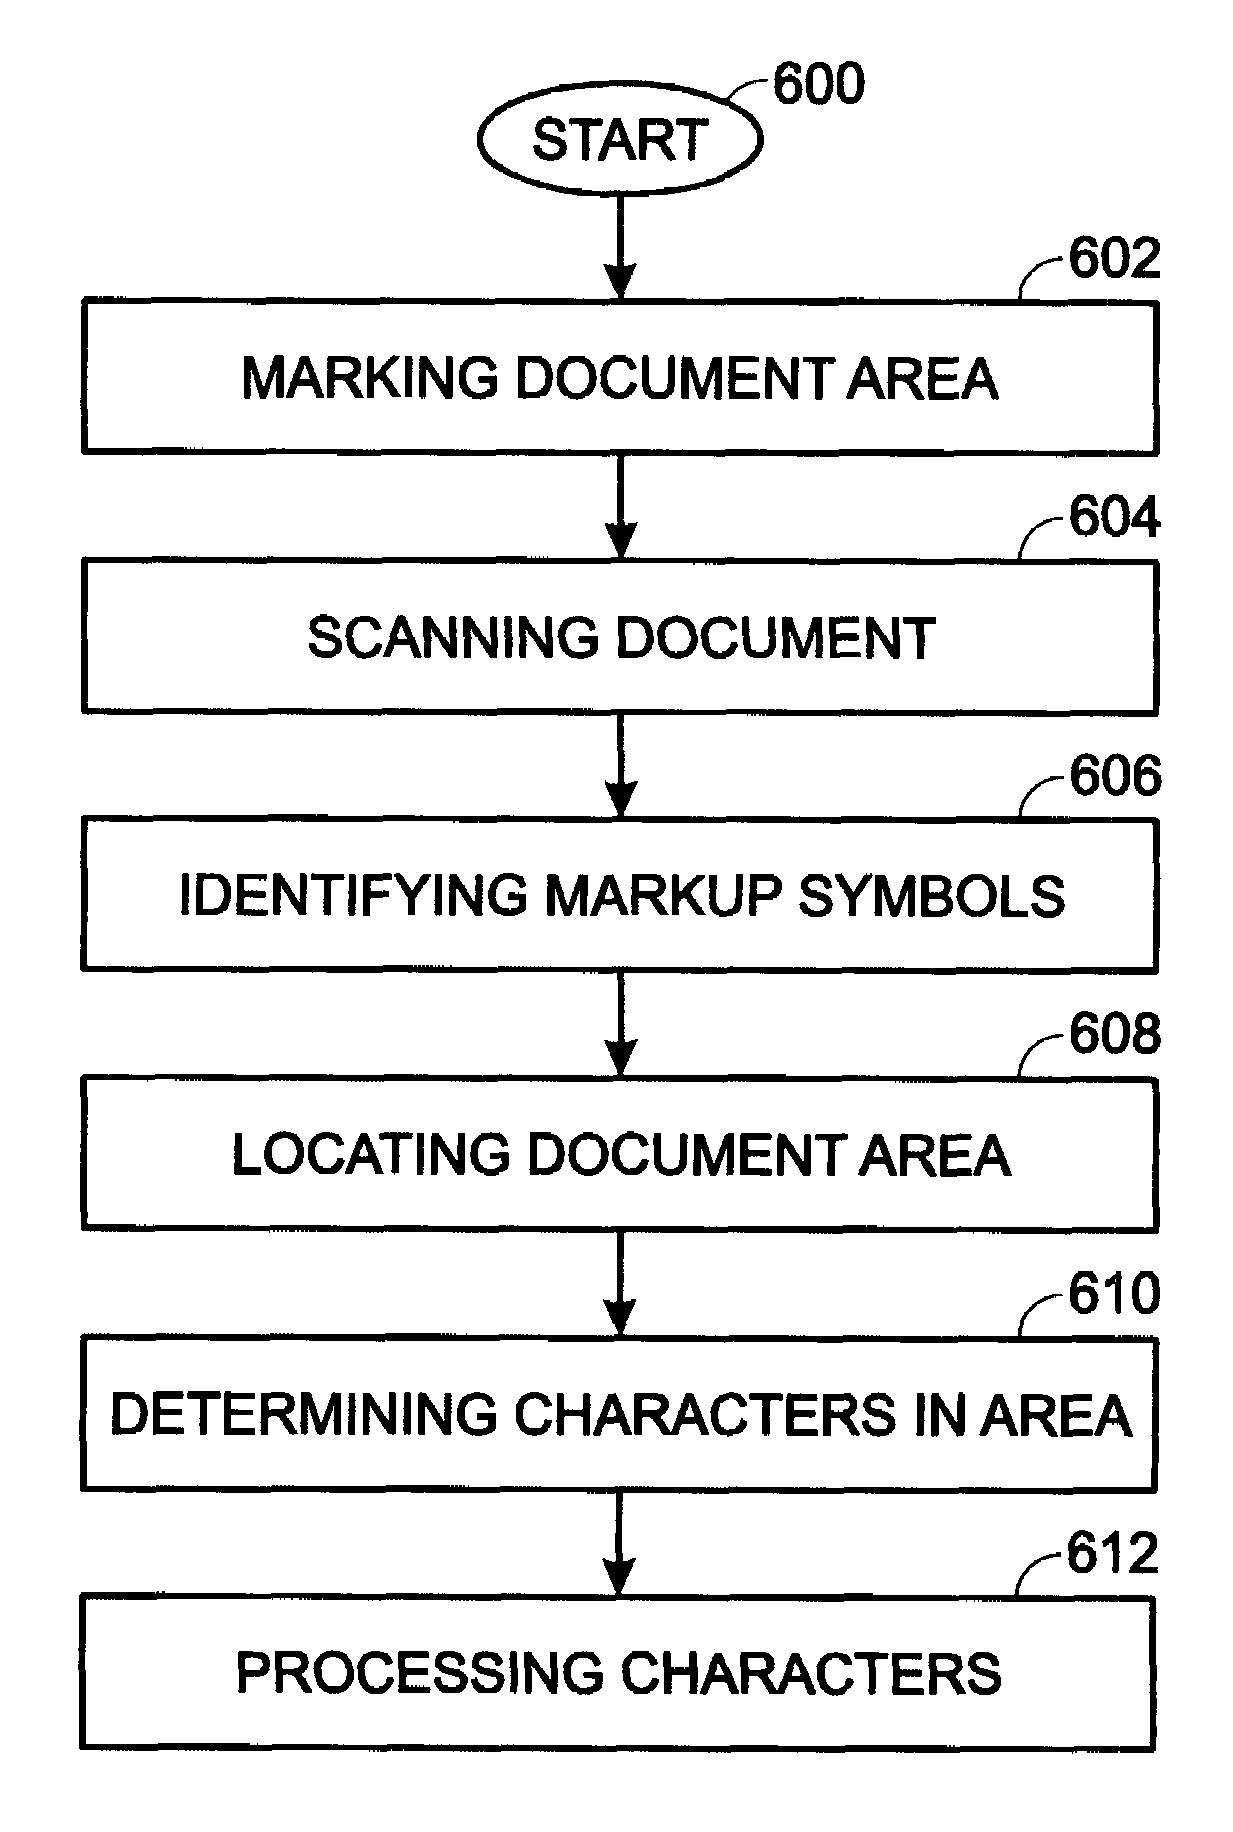 System and method for locating document areas using markup symbols